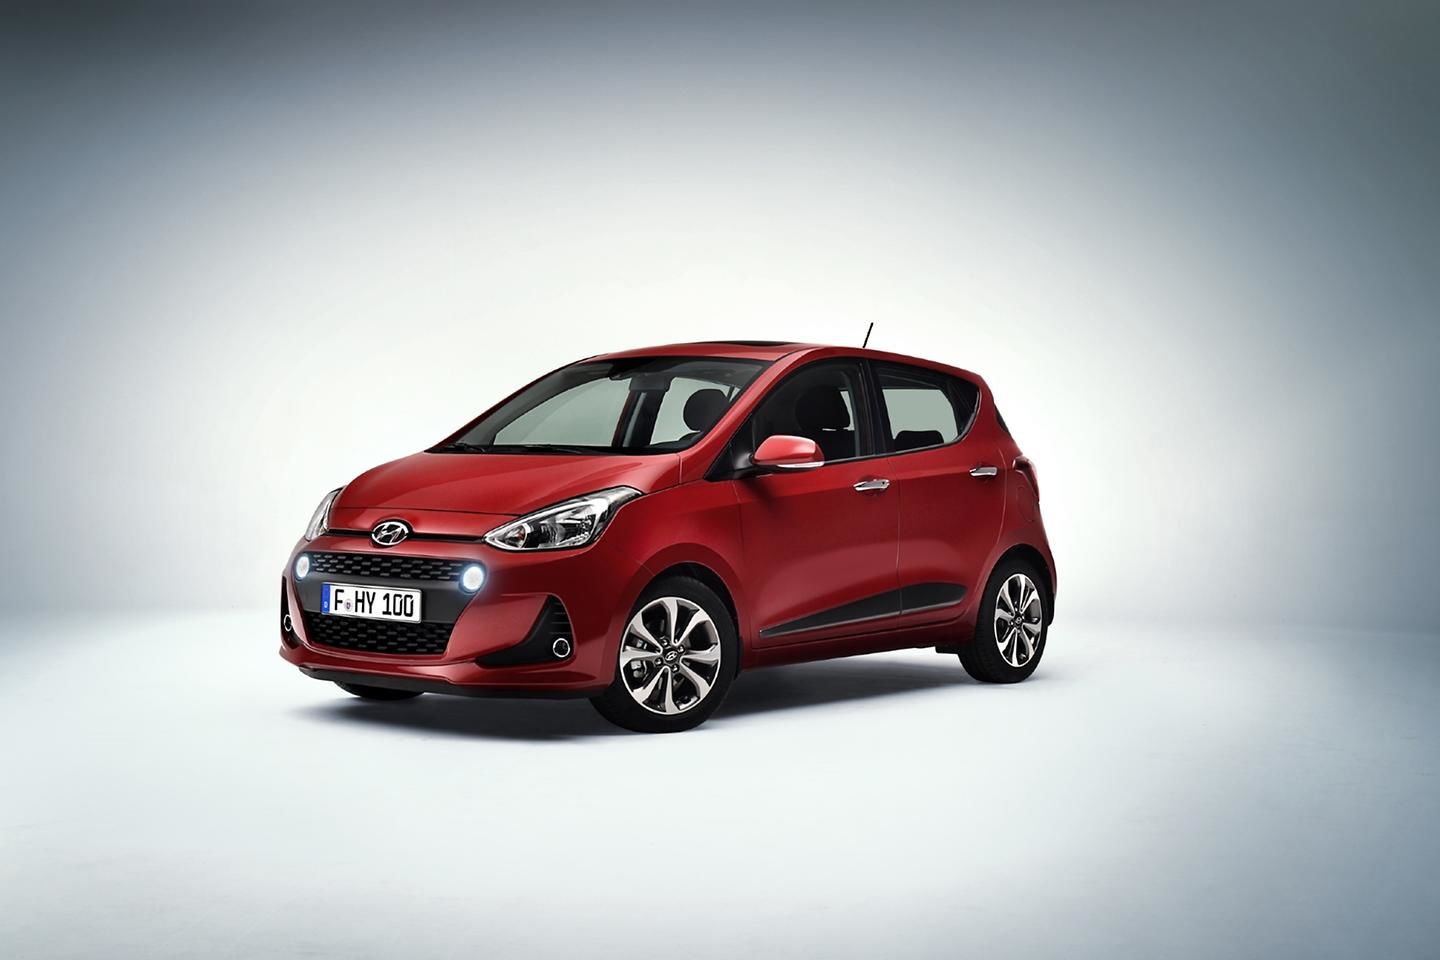 The New i10: More style and advanced technology for an even greater package